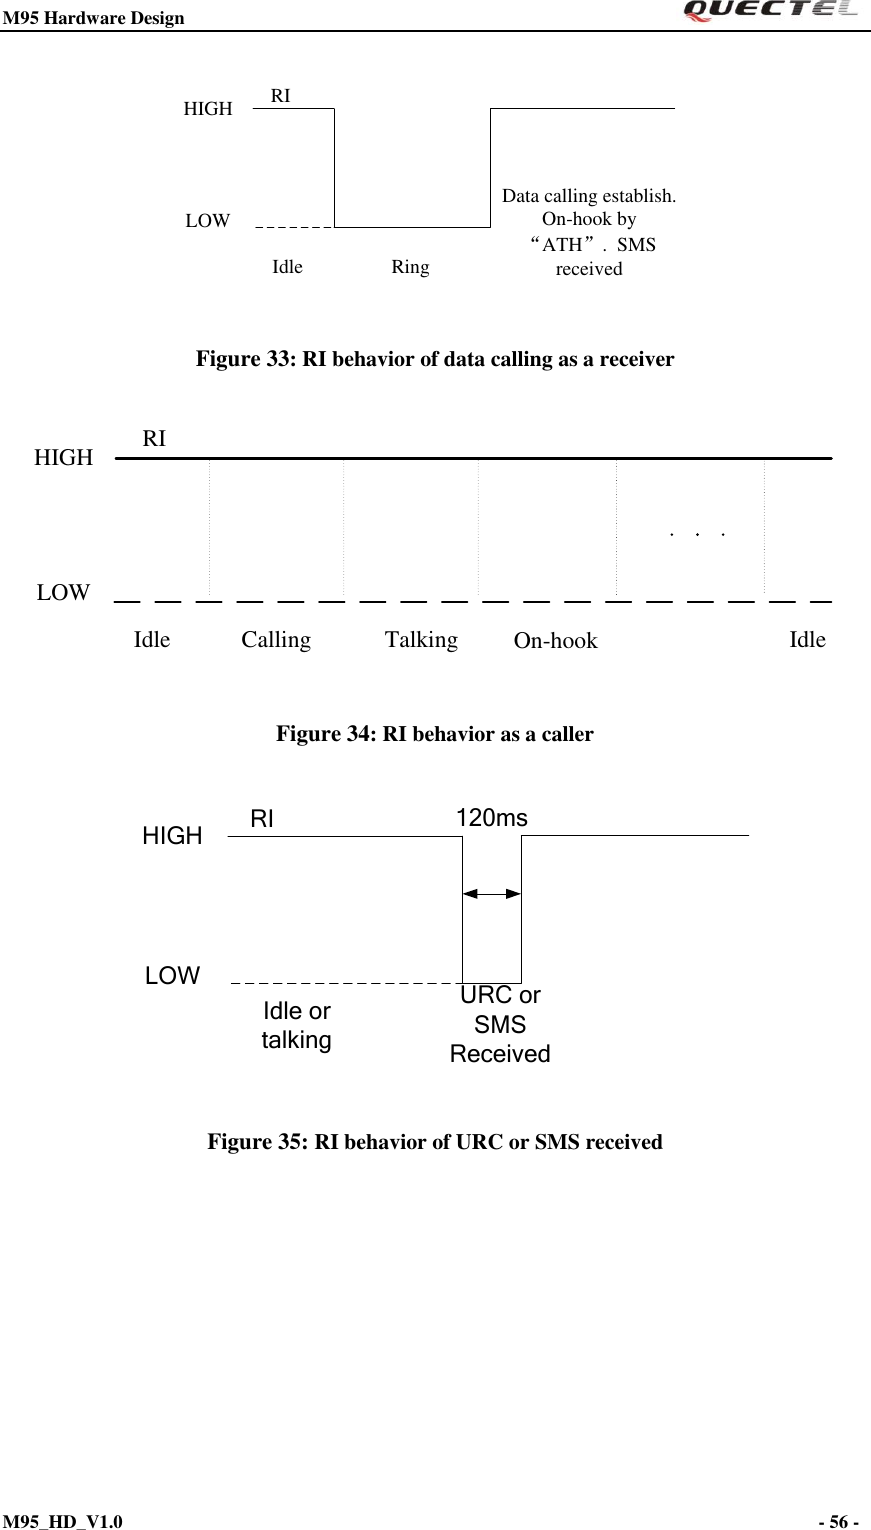 M95 Hardware Design                                                       M95_HD_V1.0                                                                - 56 -    RIIdle RingData calling establish. On-hook by “ATH”.  SMS receivedHIGHLOW Figure 33: RI behavior of data calling as a receiver RIIdle Calling On-hookTalkingHIGHLOWIdle Figure 34: RI behavior as a caller RIIdle or talking URC or                   SMS Received HIGHLOW120ms Figure 35: RI behavior of URC or SMS received      